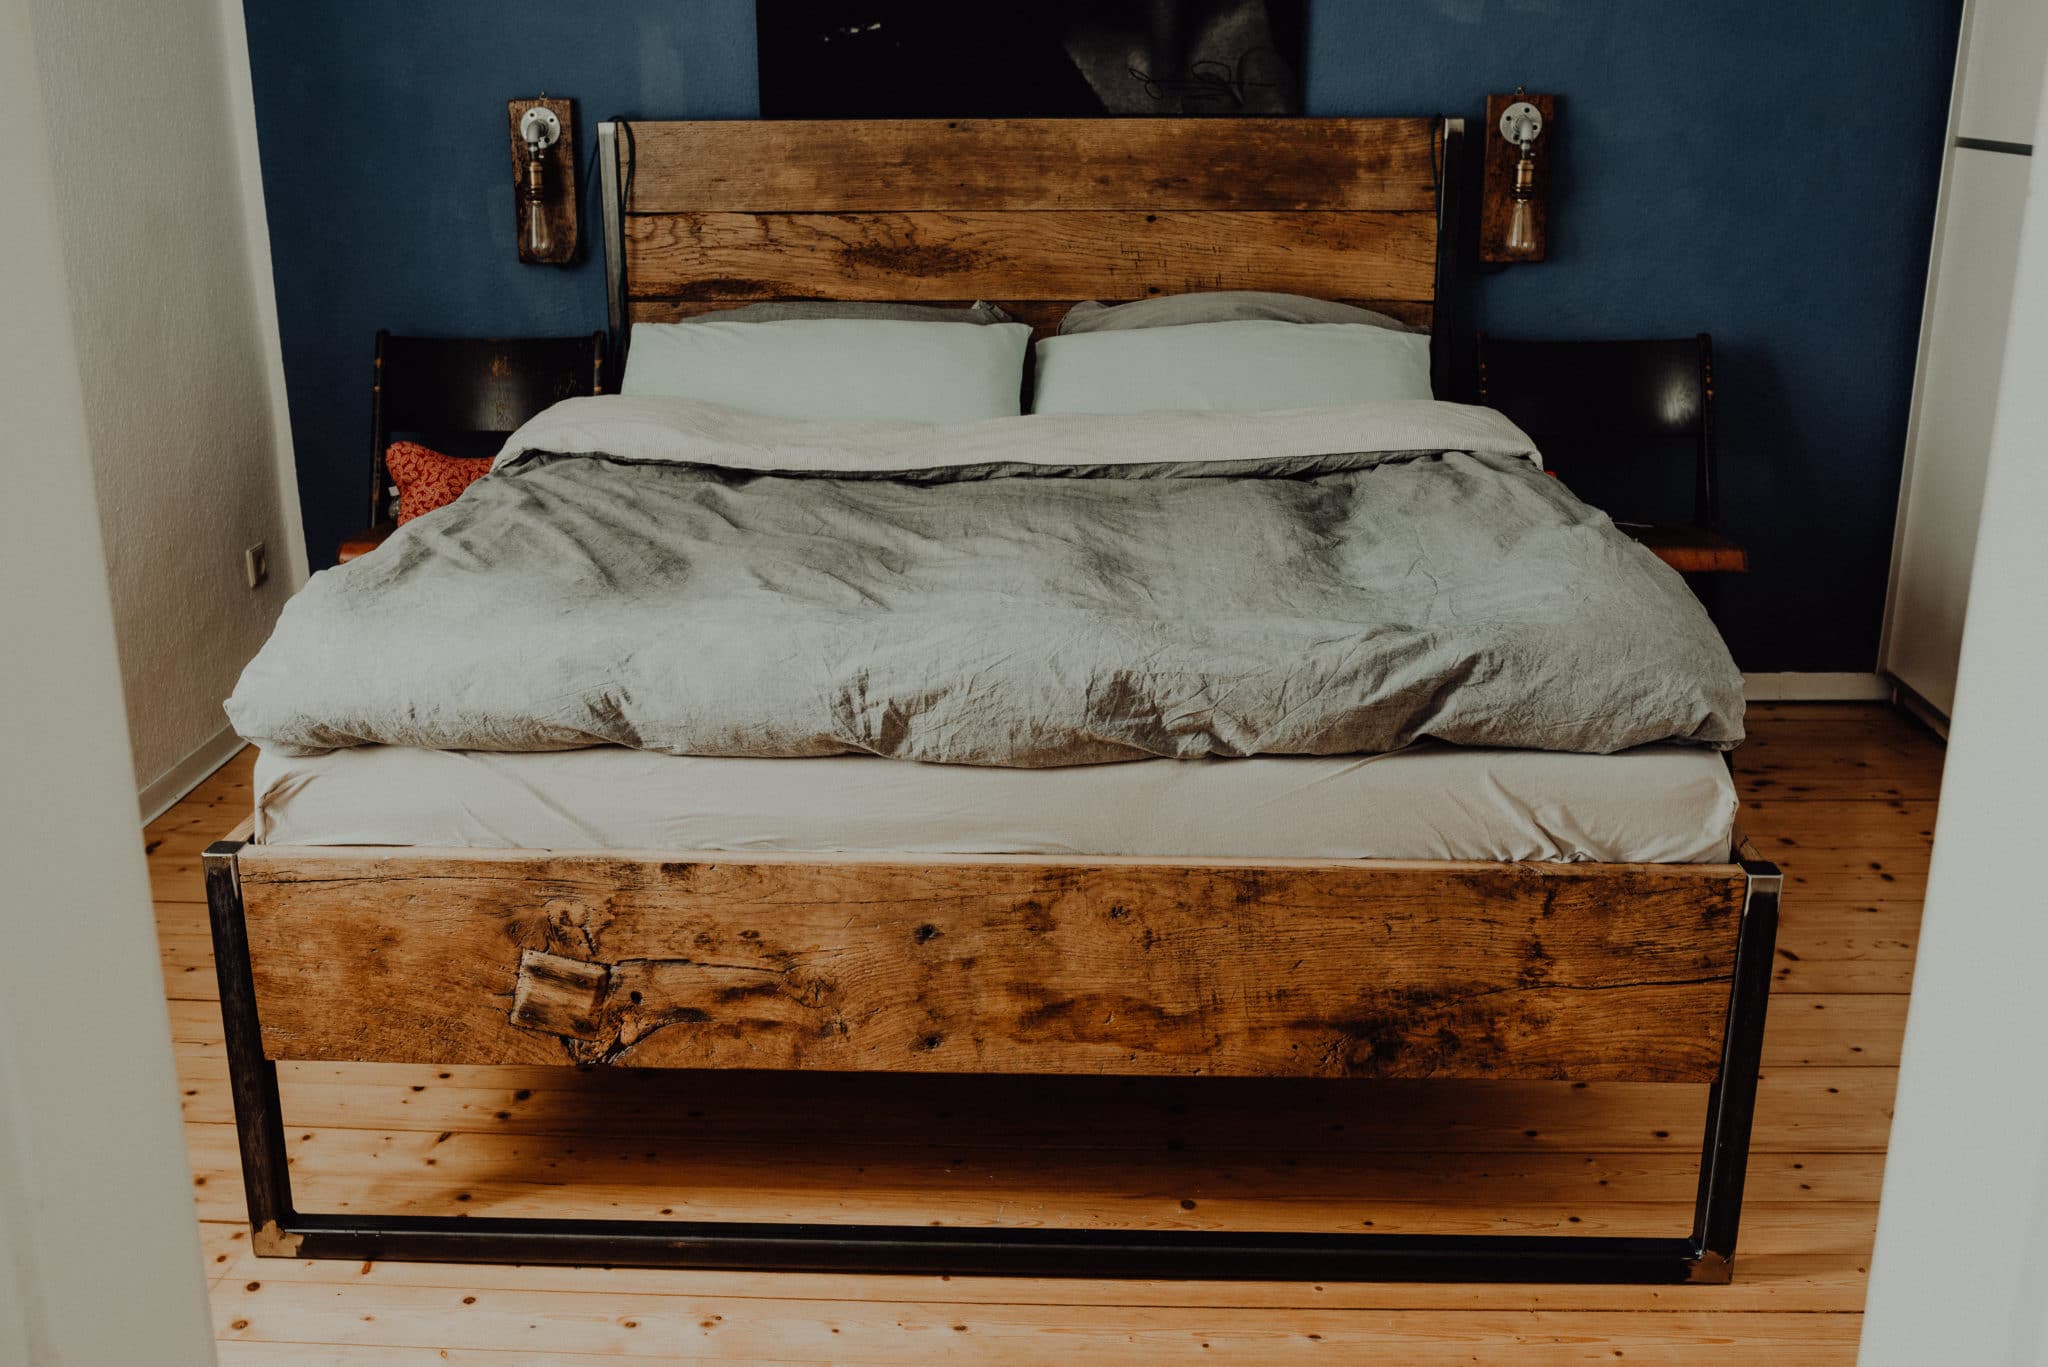 Industrial Style Bed made out of old barn wood, with a steel frame.

Unfortunately, this has already found a new home.